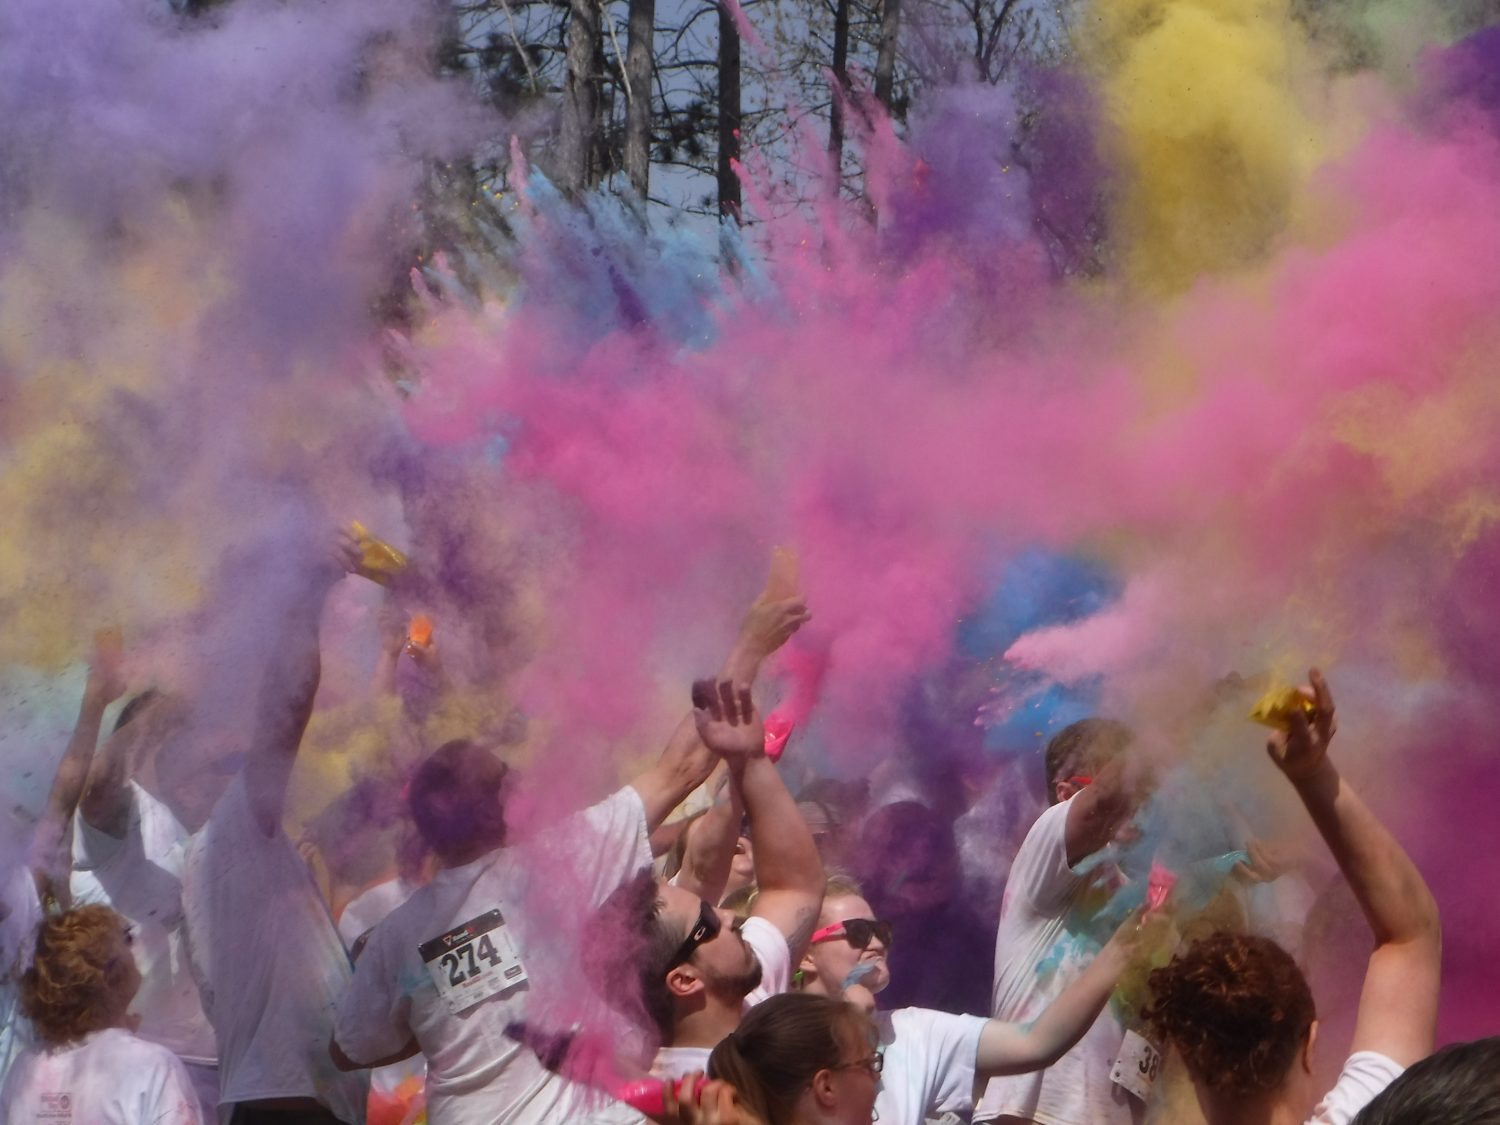 Kolor Run encourages groups and organizations to get creative and register